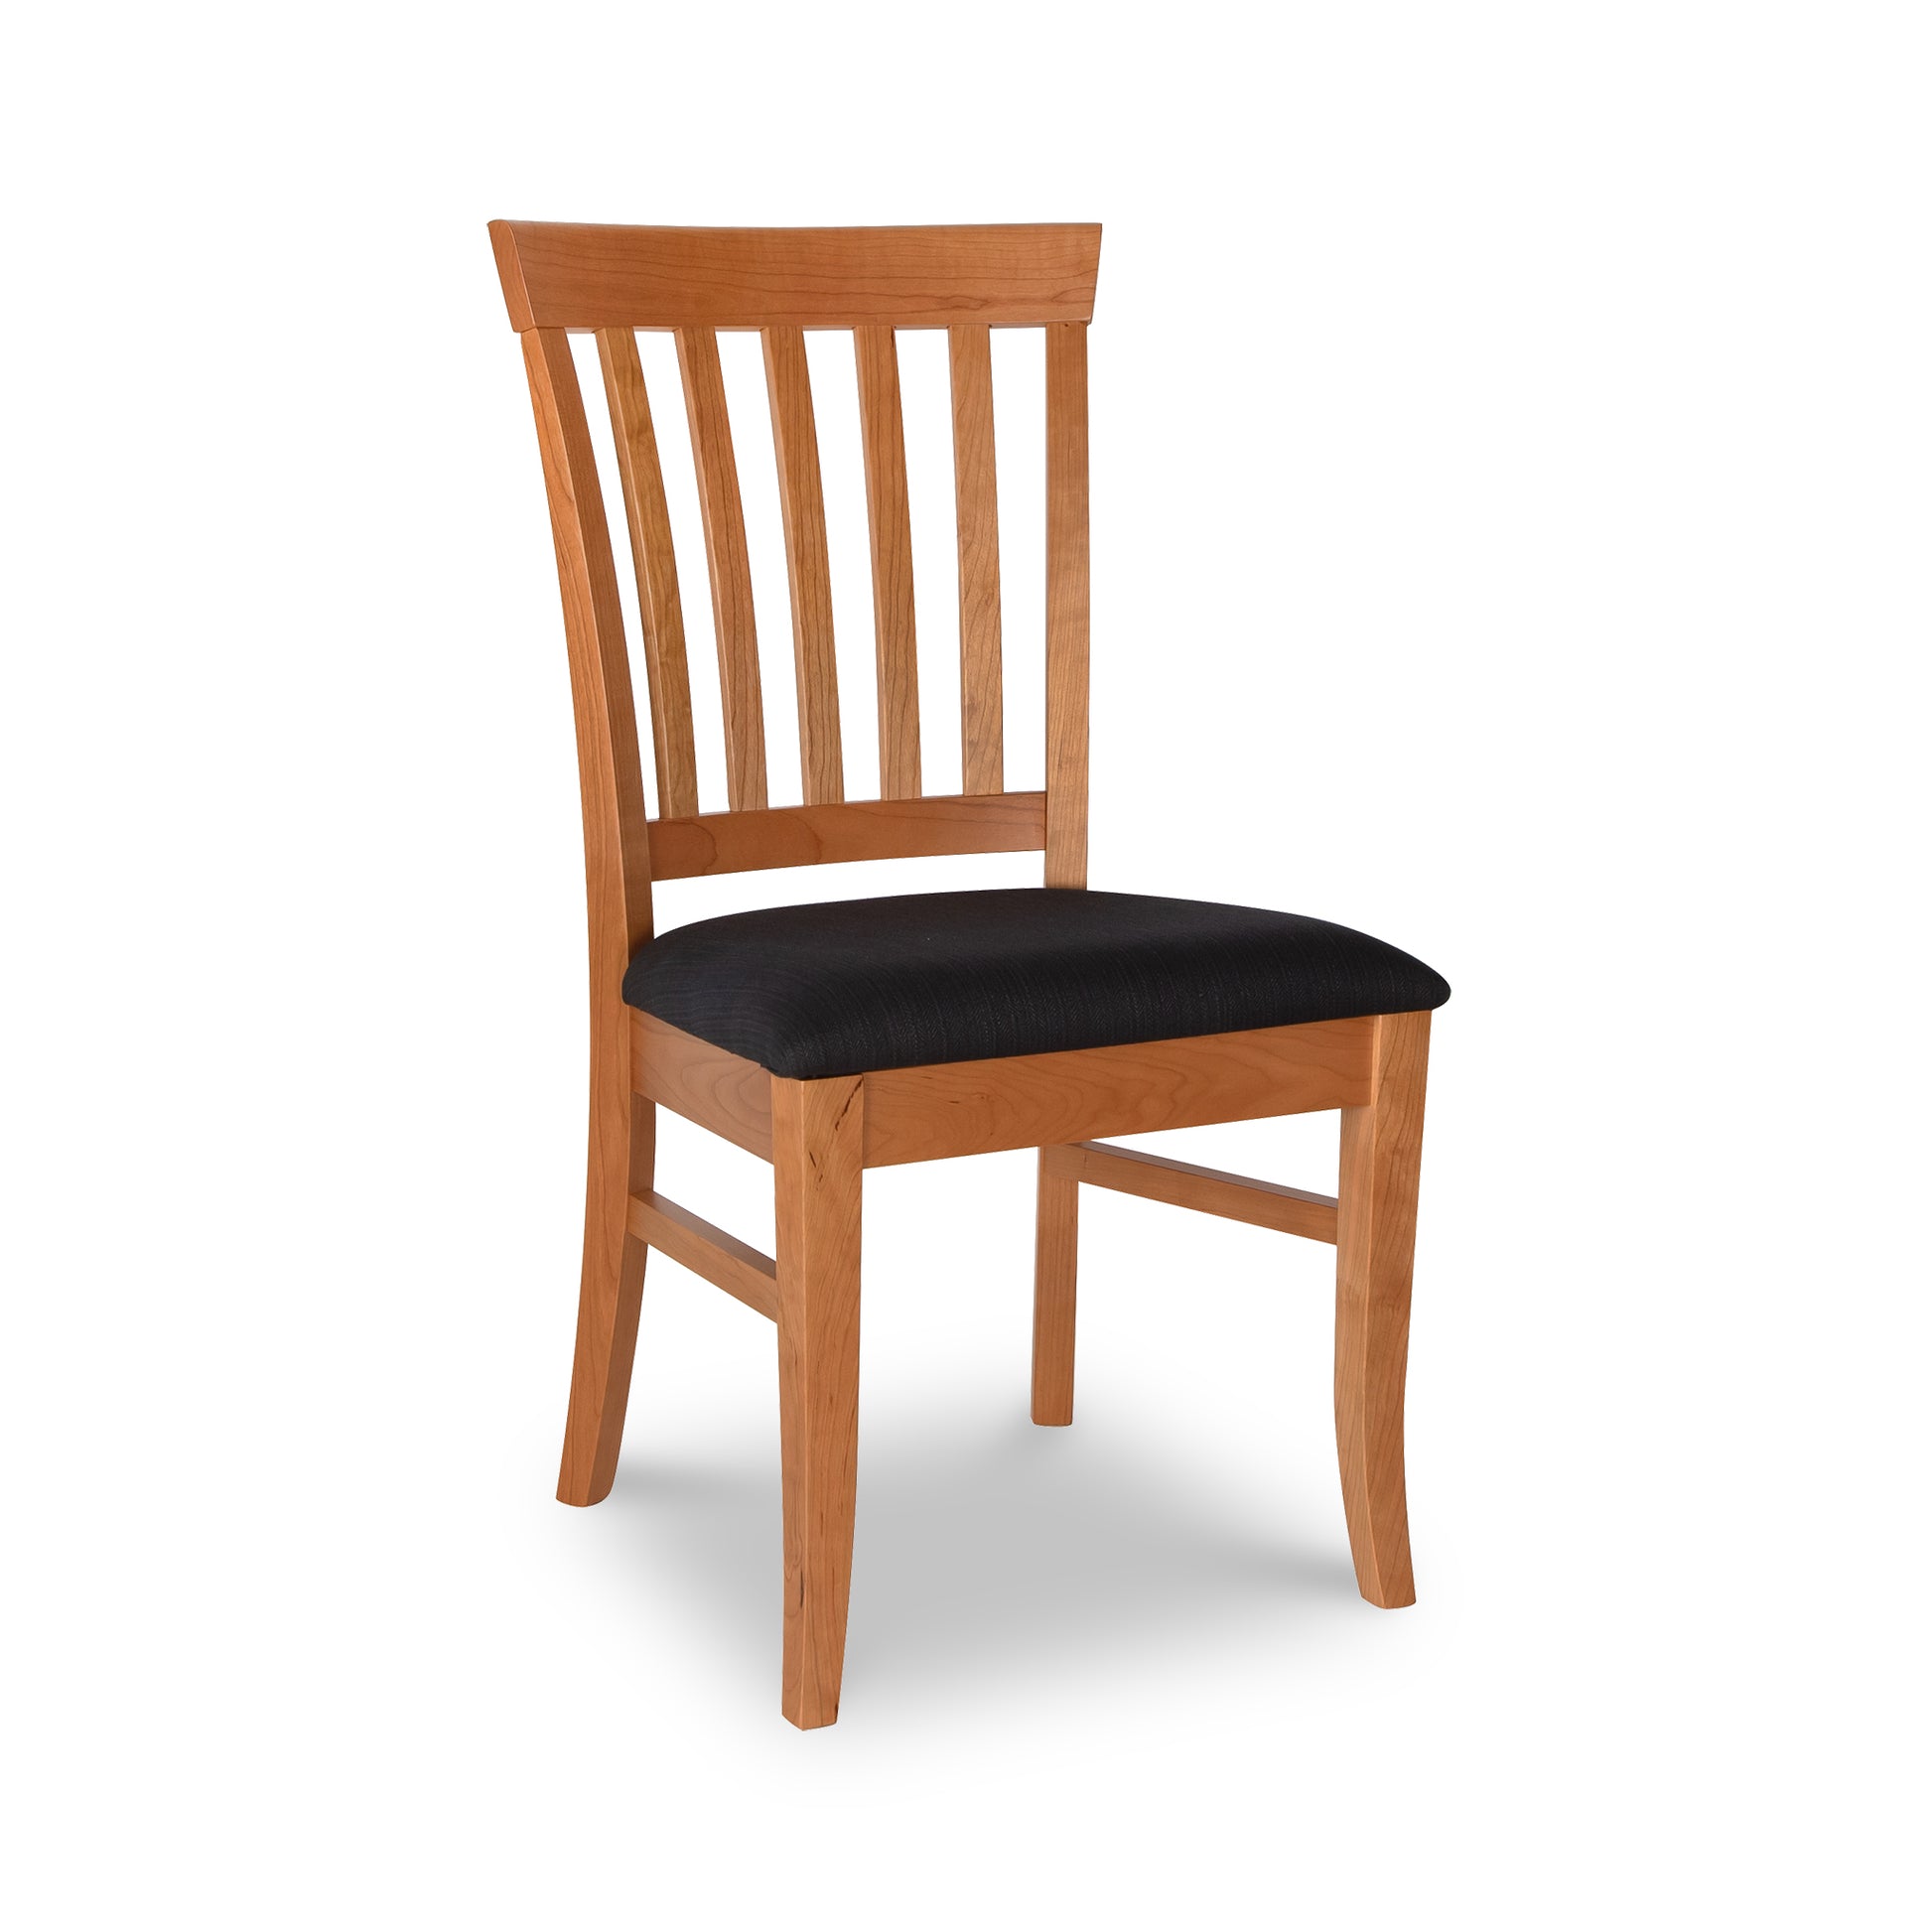 A Lyndon Furniture Bistro Dining Chair with a black upholstered seat.